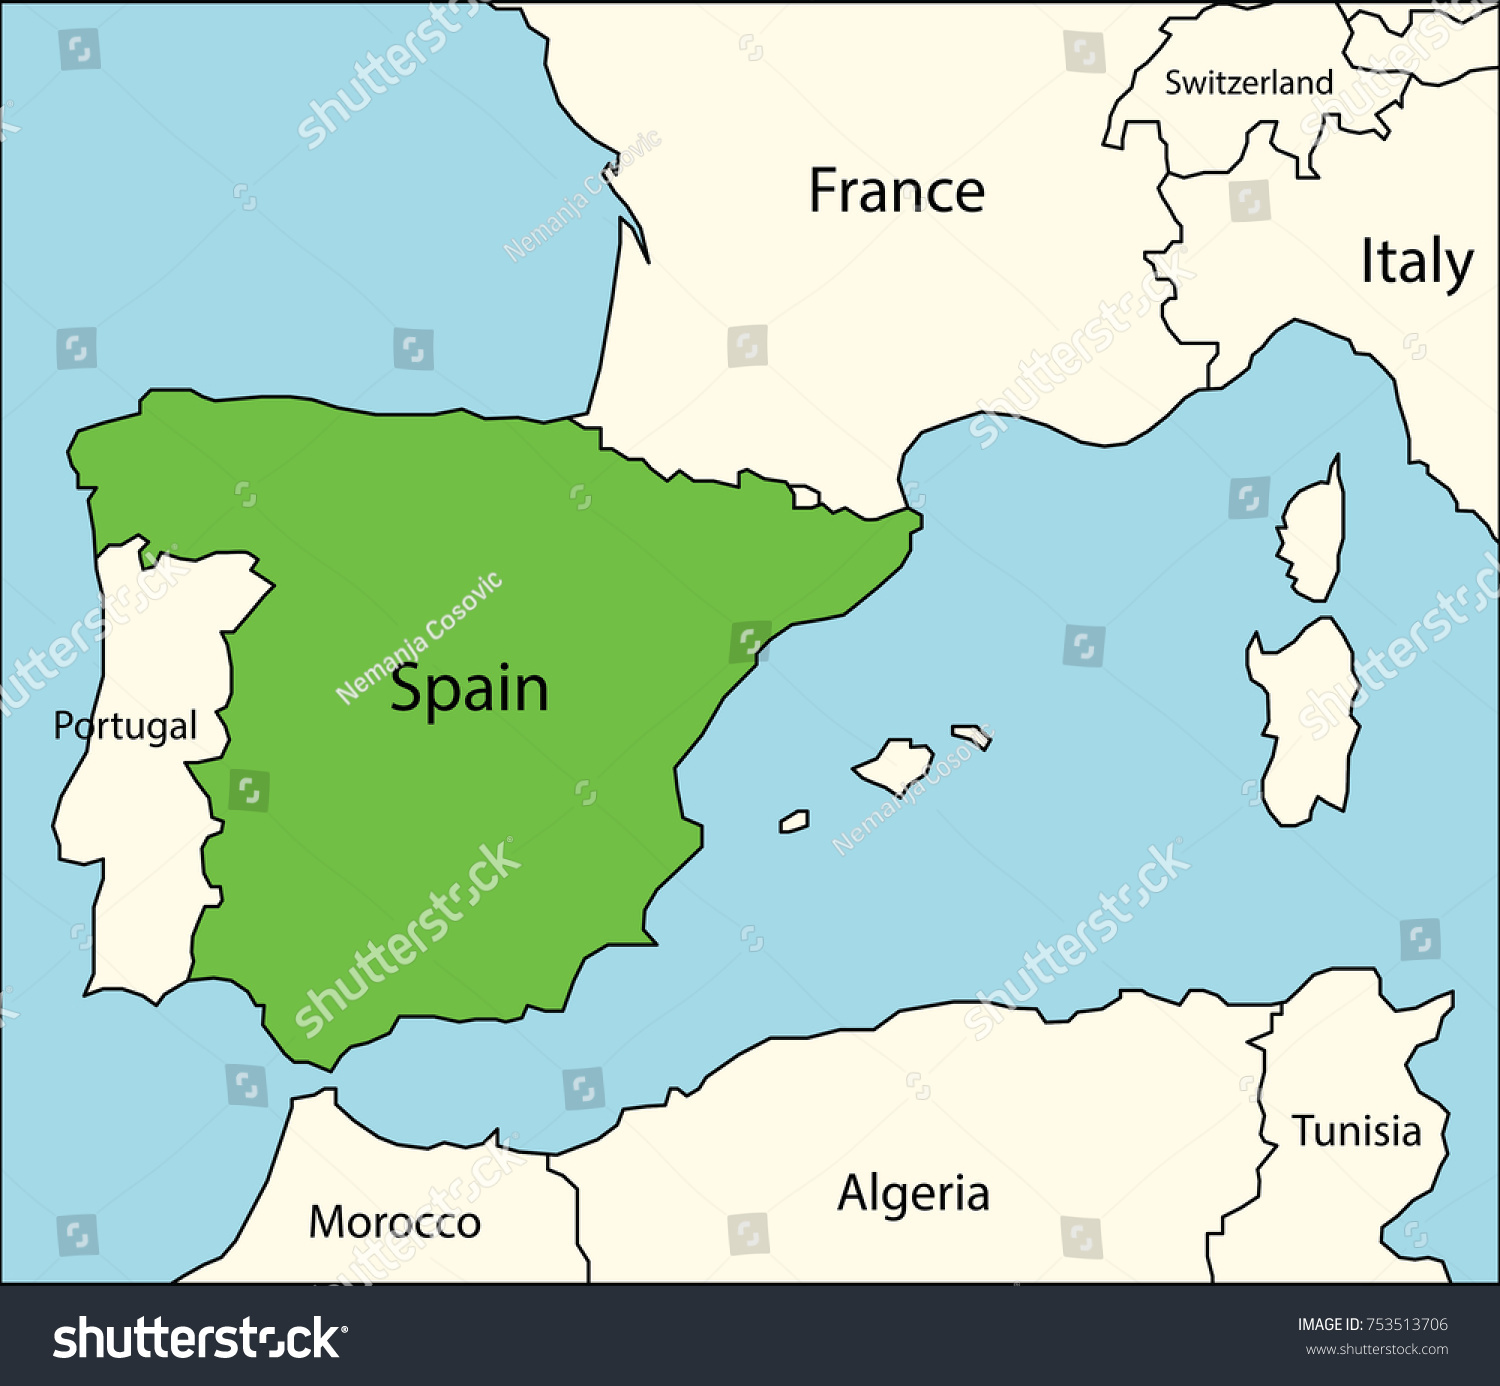 map of spain and surrounding countries Spain Map Neighboring Countries Stock Vector Royalty Free 753513706 map of spain and surrounding countries